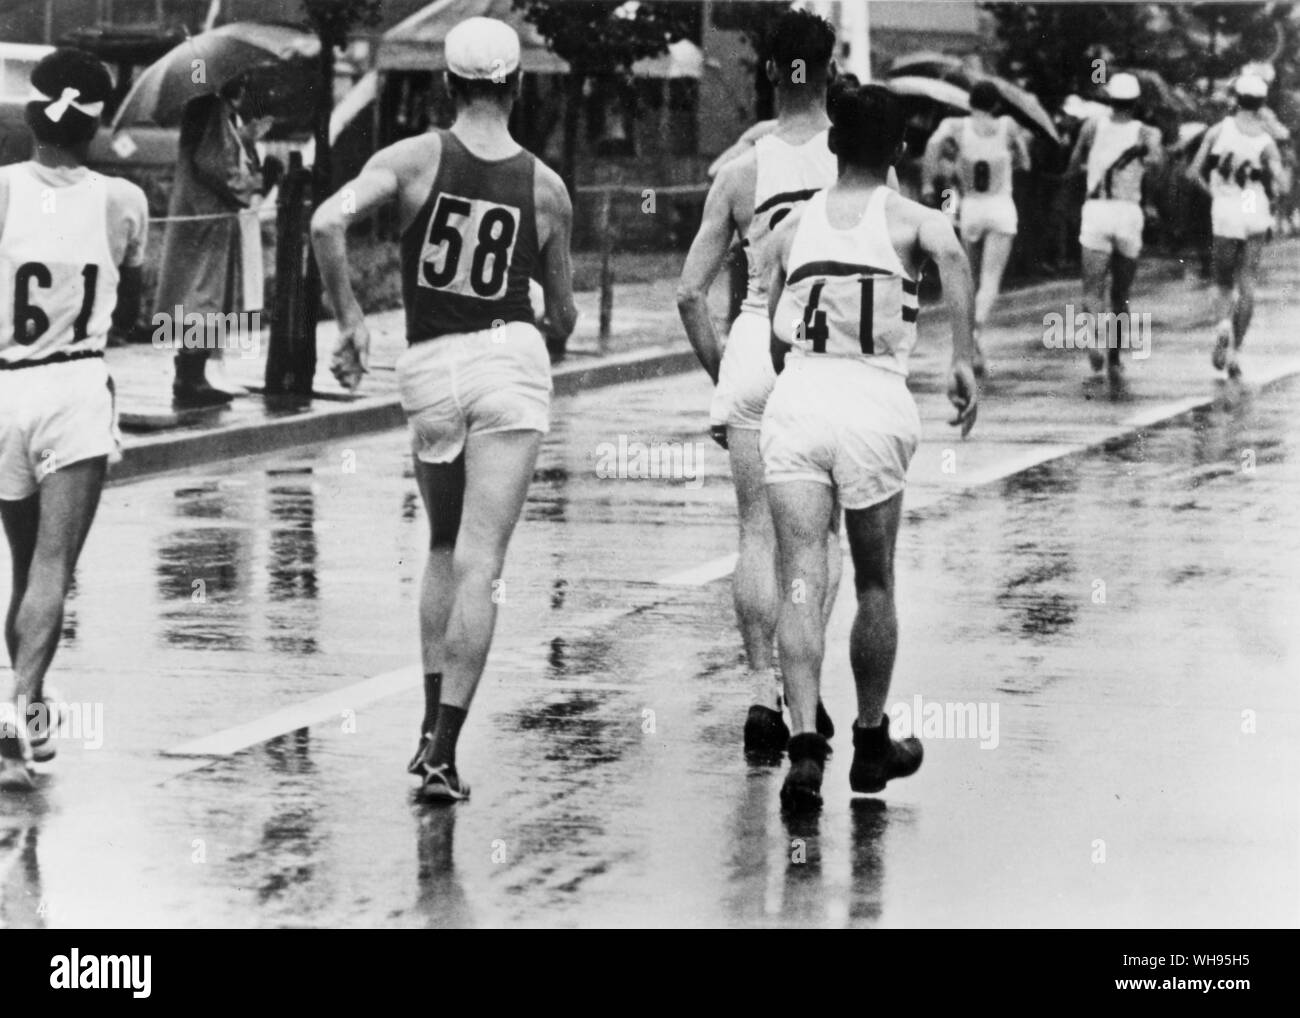 Japan, Tokyo Olympic Games, 1964: 50 km road walk. Don Thompson (41) Rome 1960 gold medalist en route to 10th place Stock Photo